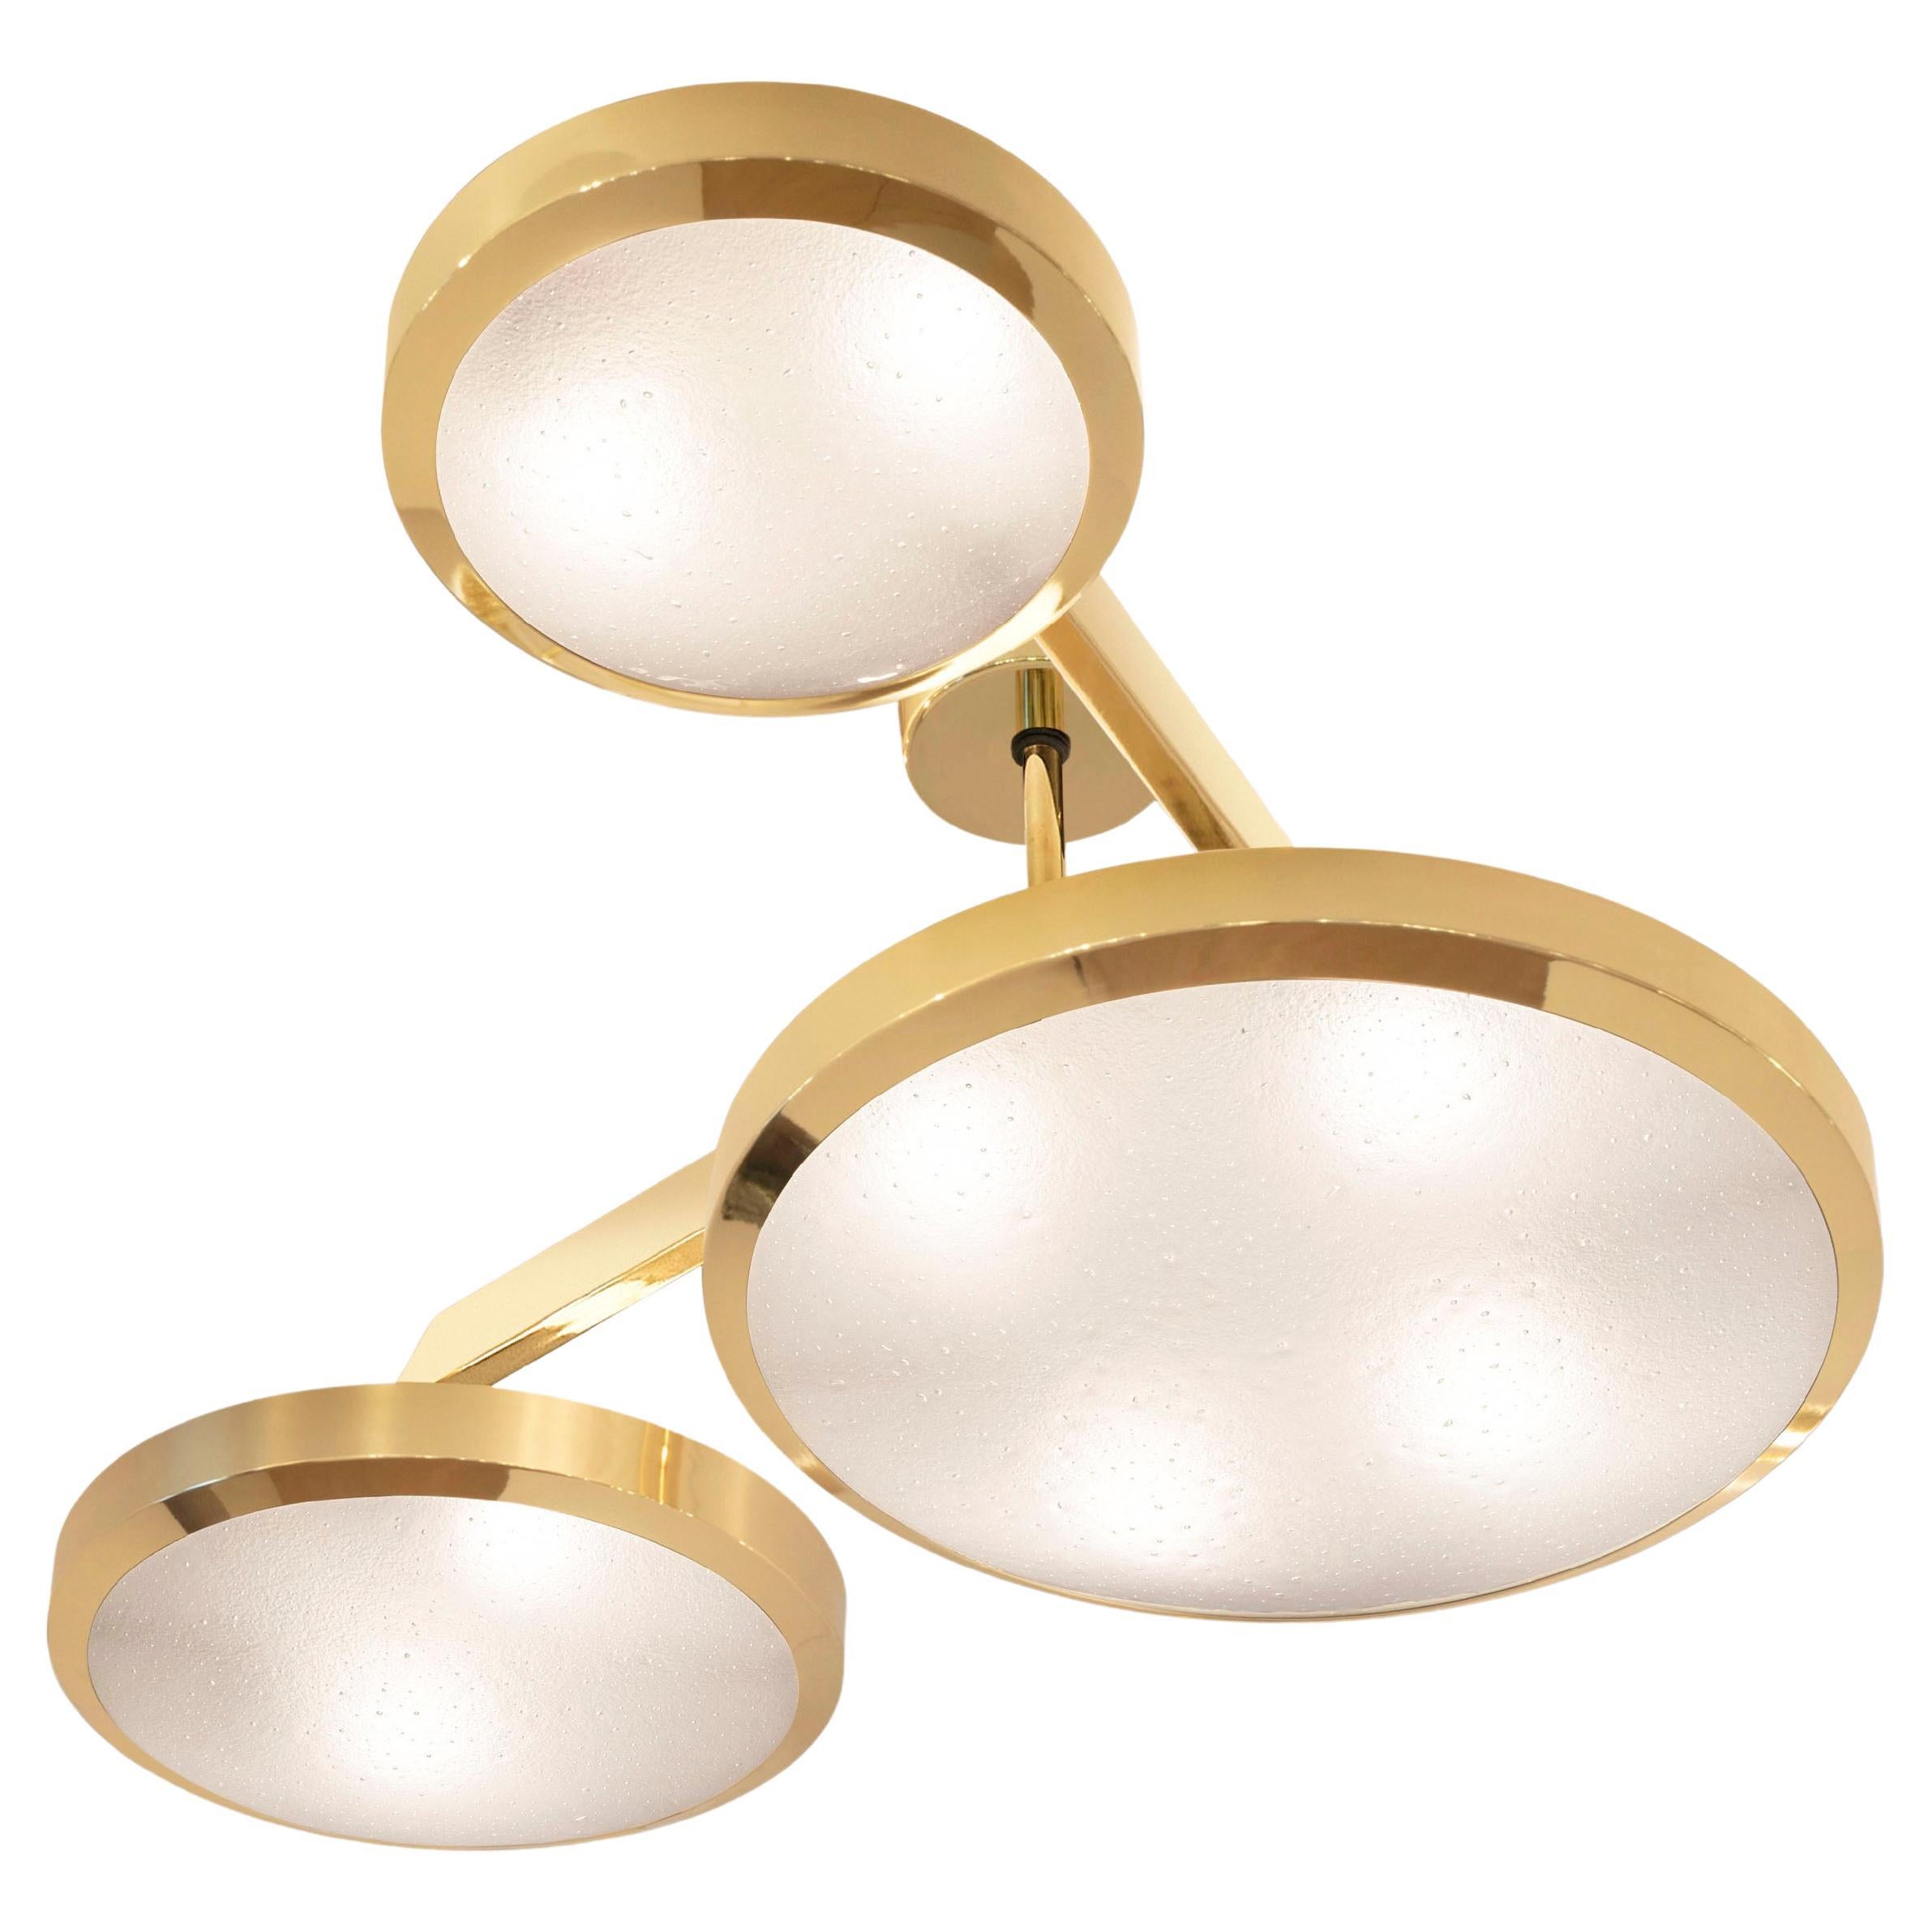 Zeta Ceiling Light by Gaspare Asaro - Polished Brass Finish